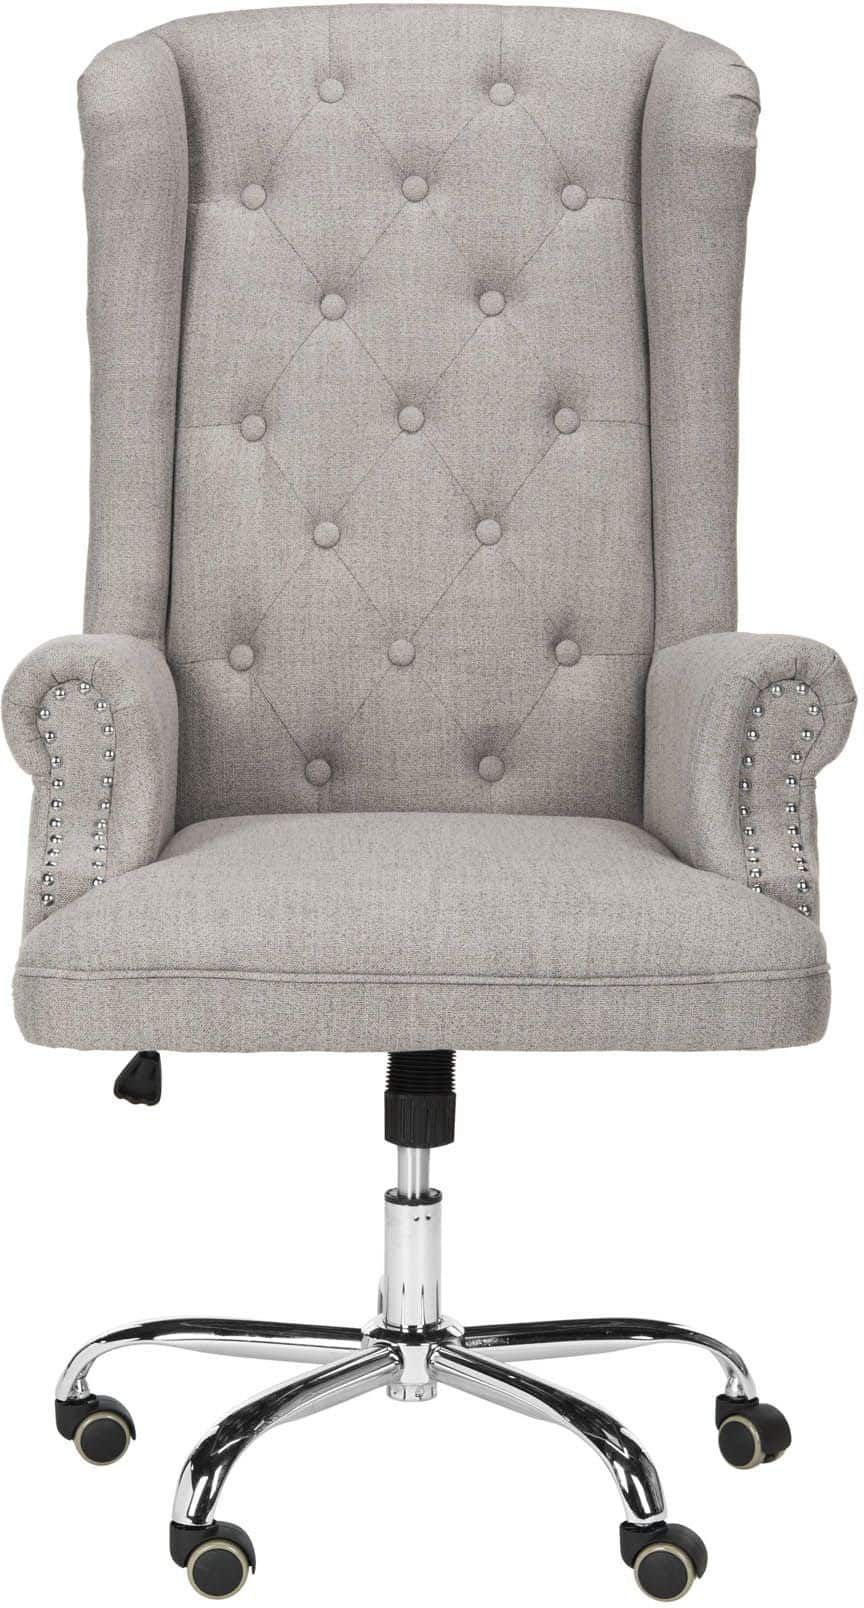 IAN TUFTED SWIVEL OFFICE CHAIR Area Rug Free Shipping